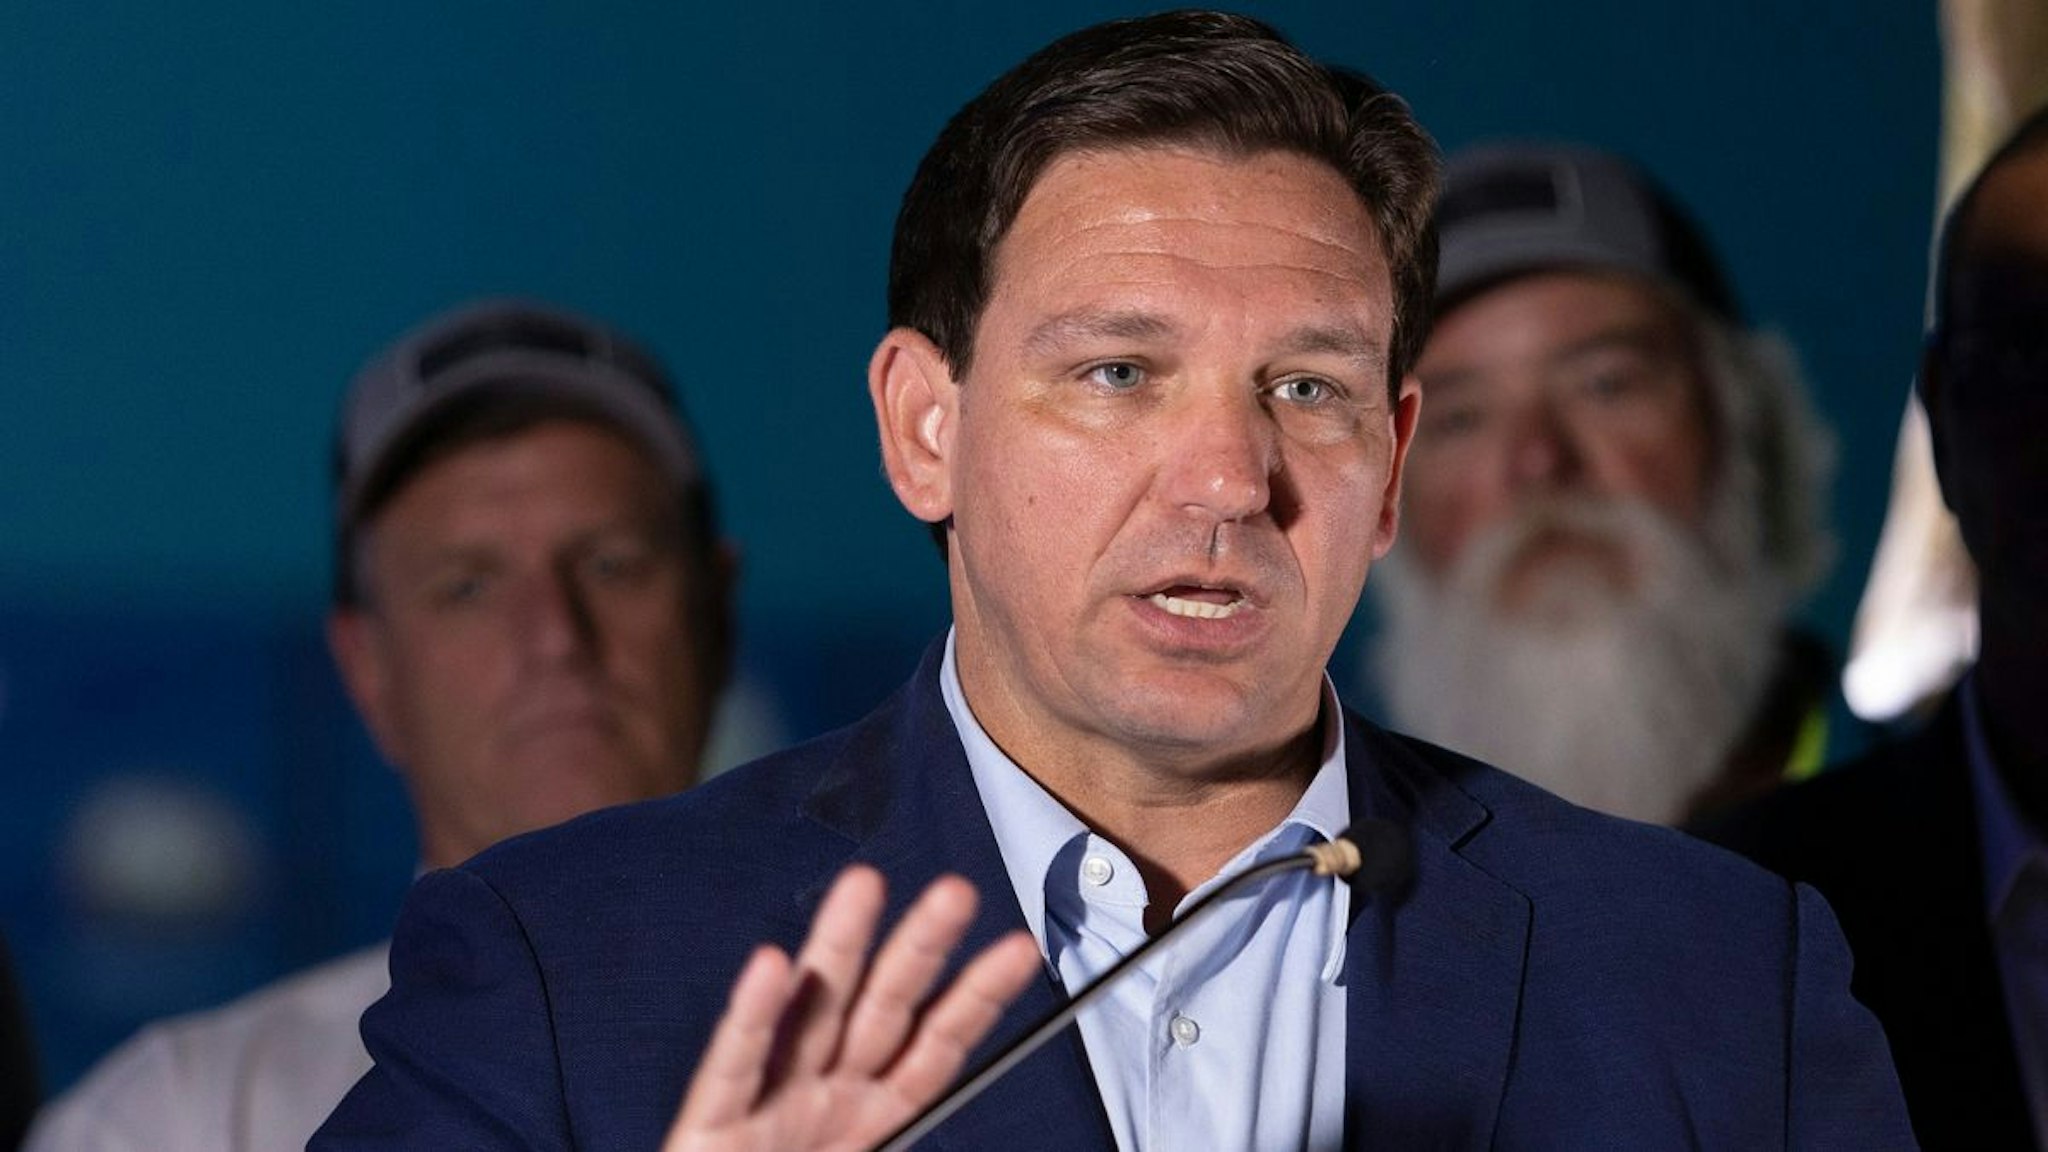 Florida Gov. Ron DeSantis speaks during a press conference held at the Cox Science Center & Aquarium on June 08, 2022 in West Palm Beach, Florida.